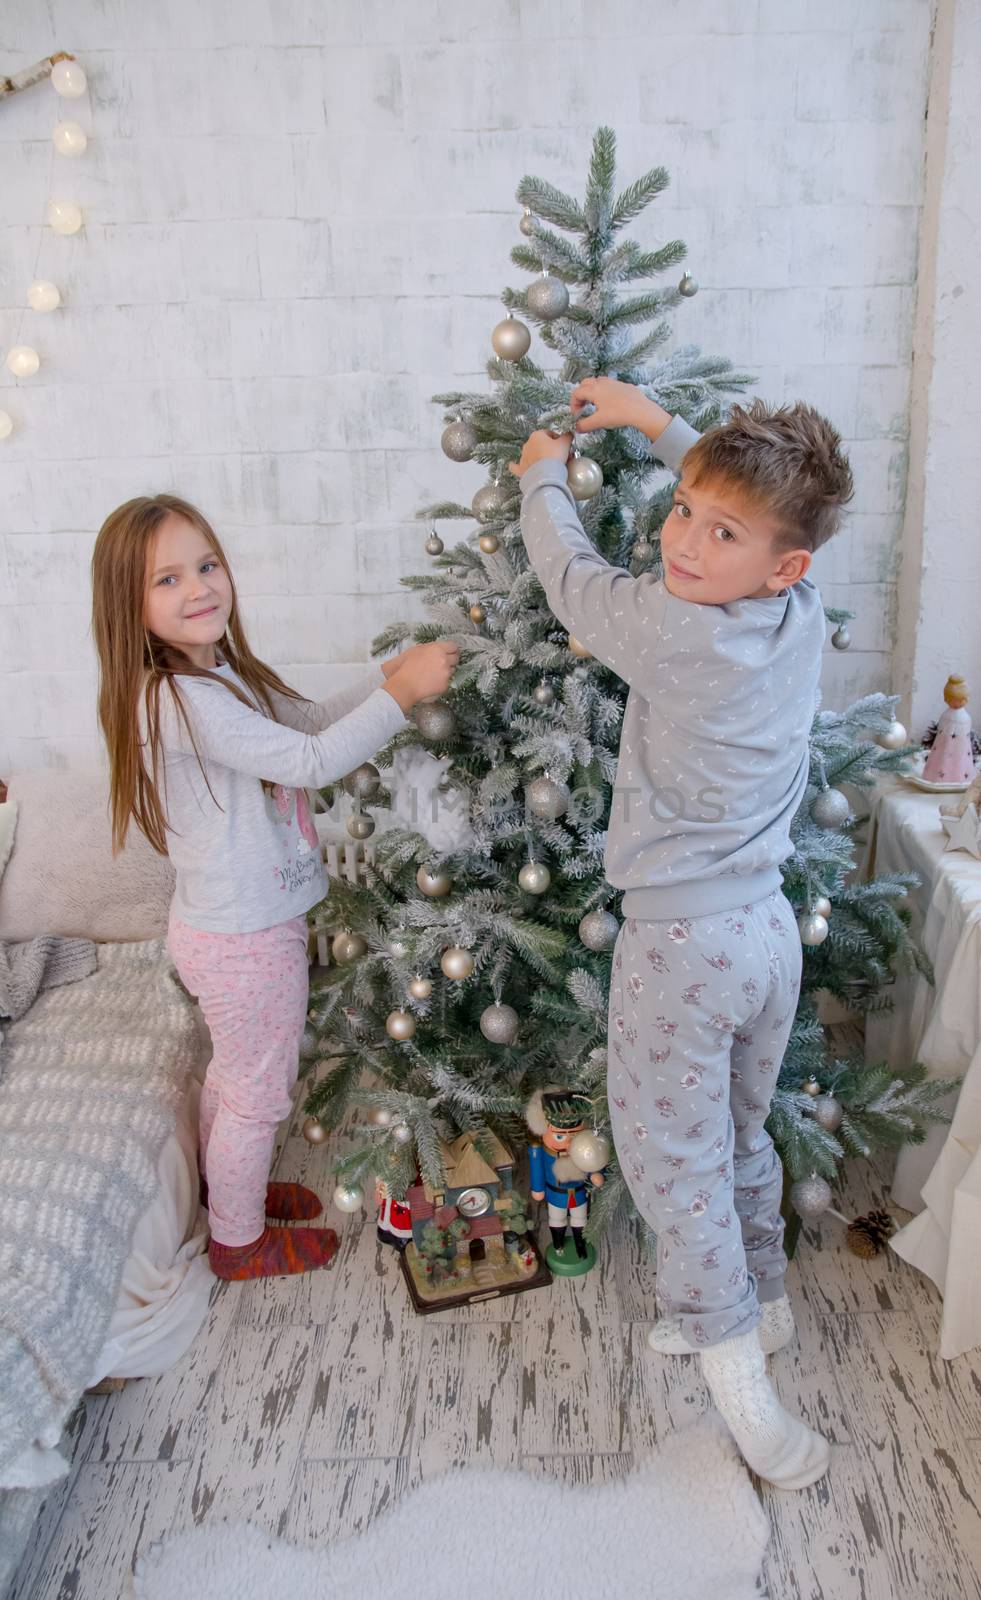 Children decorating Christmas tree with balls by Angel_a